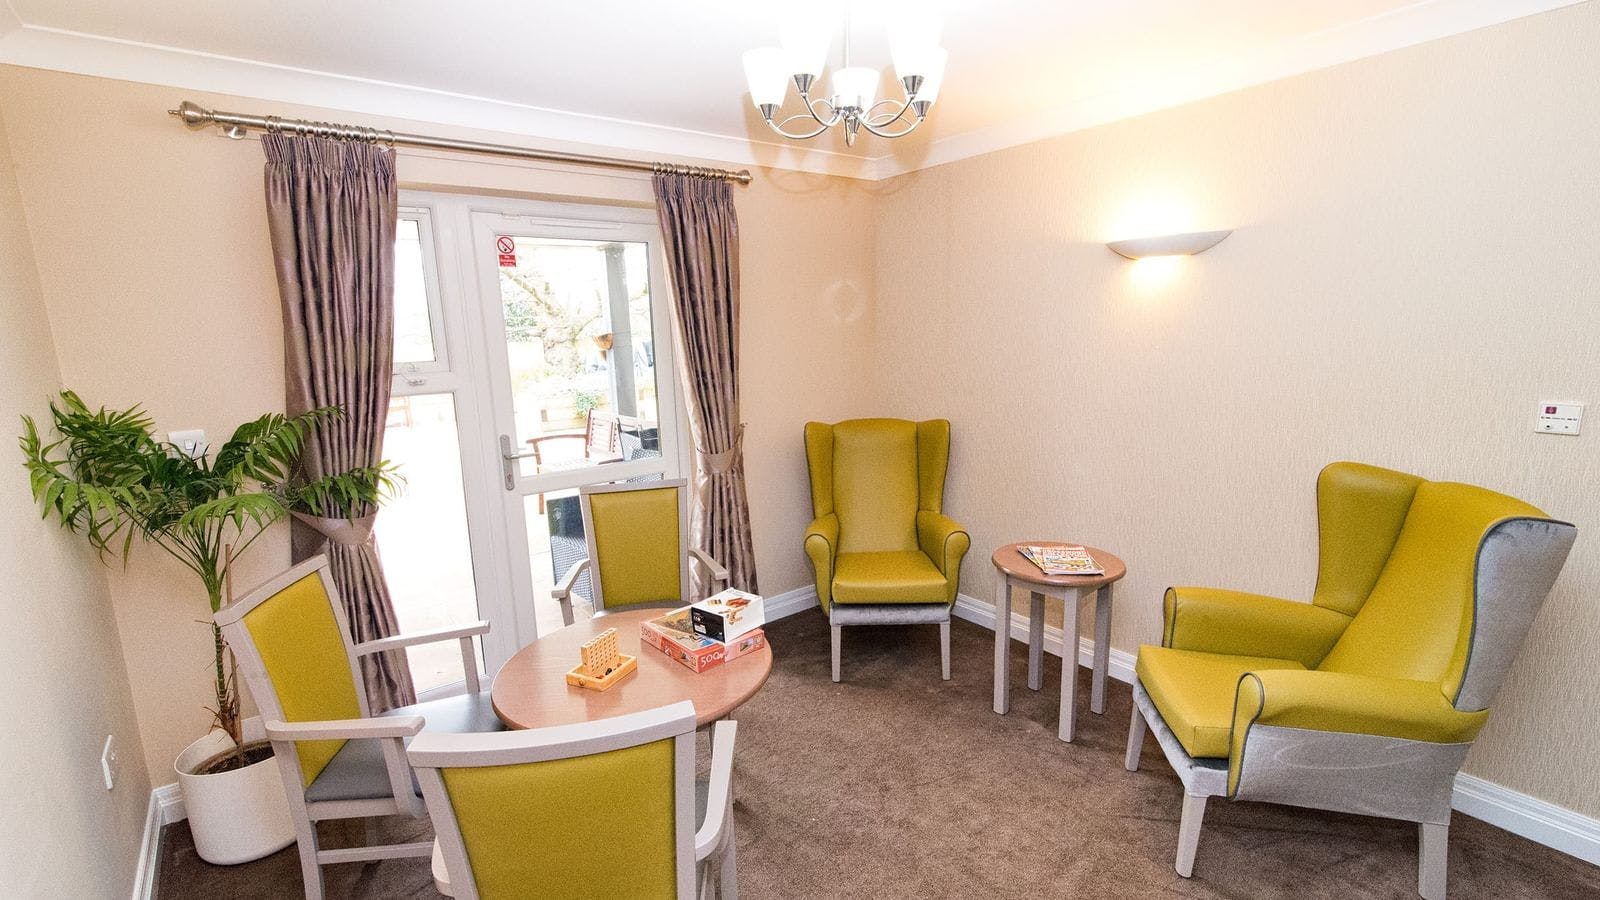 Communal Area at The Orchard Care Home in Hertfordshire, East of England